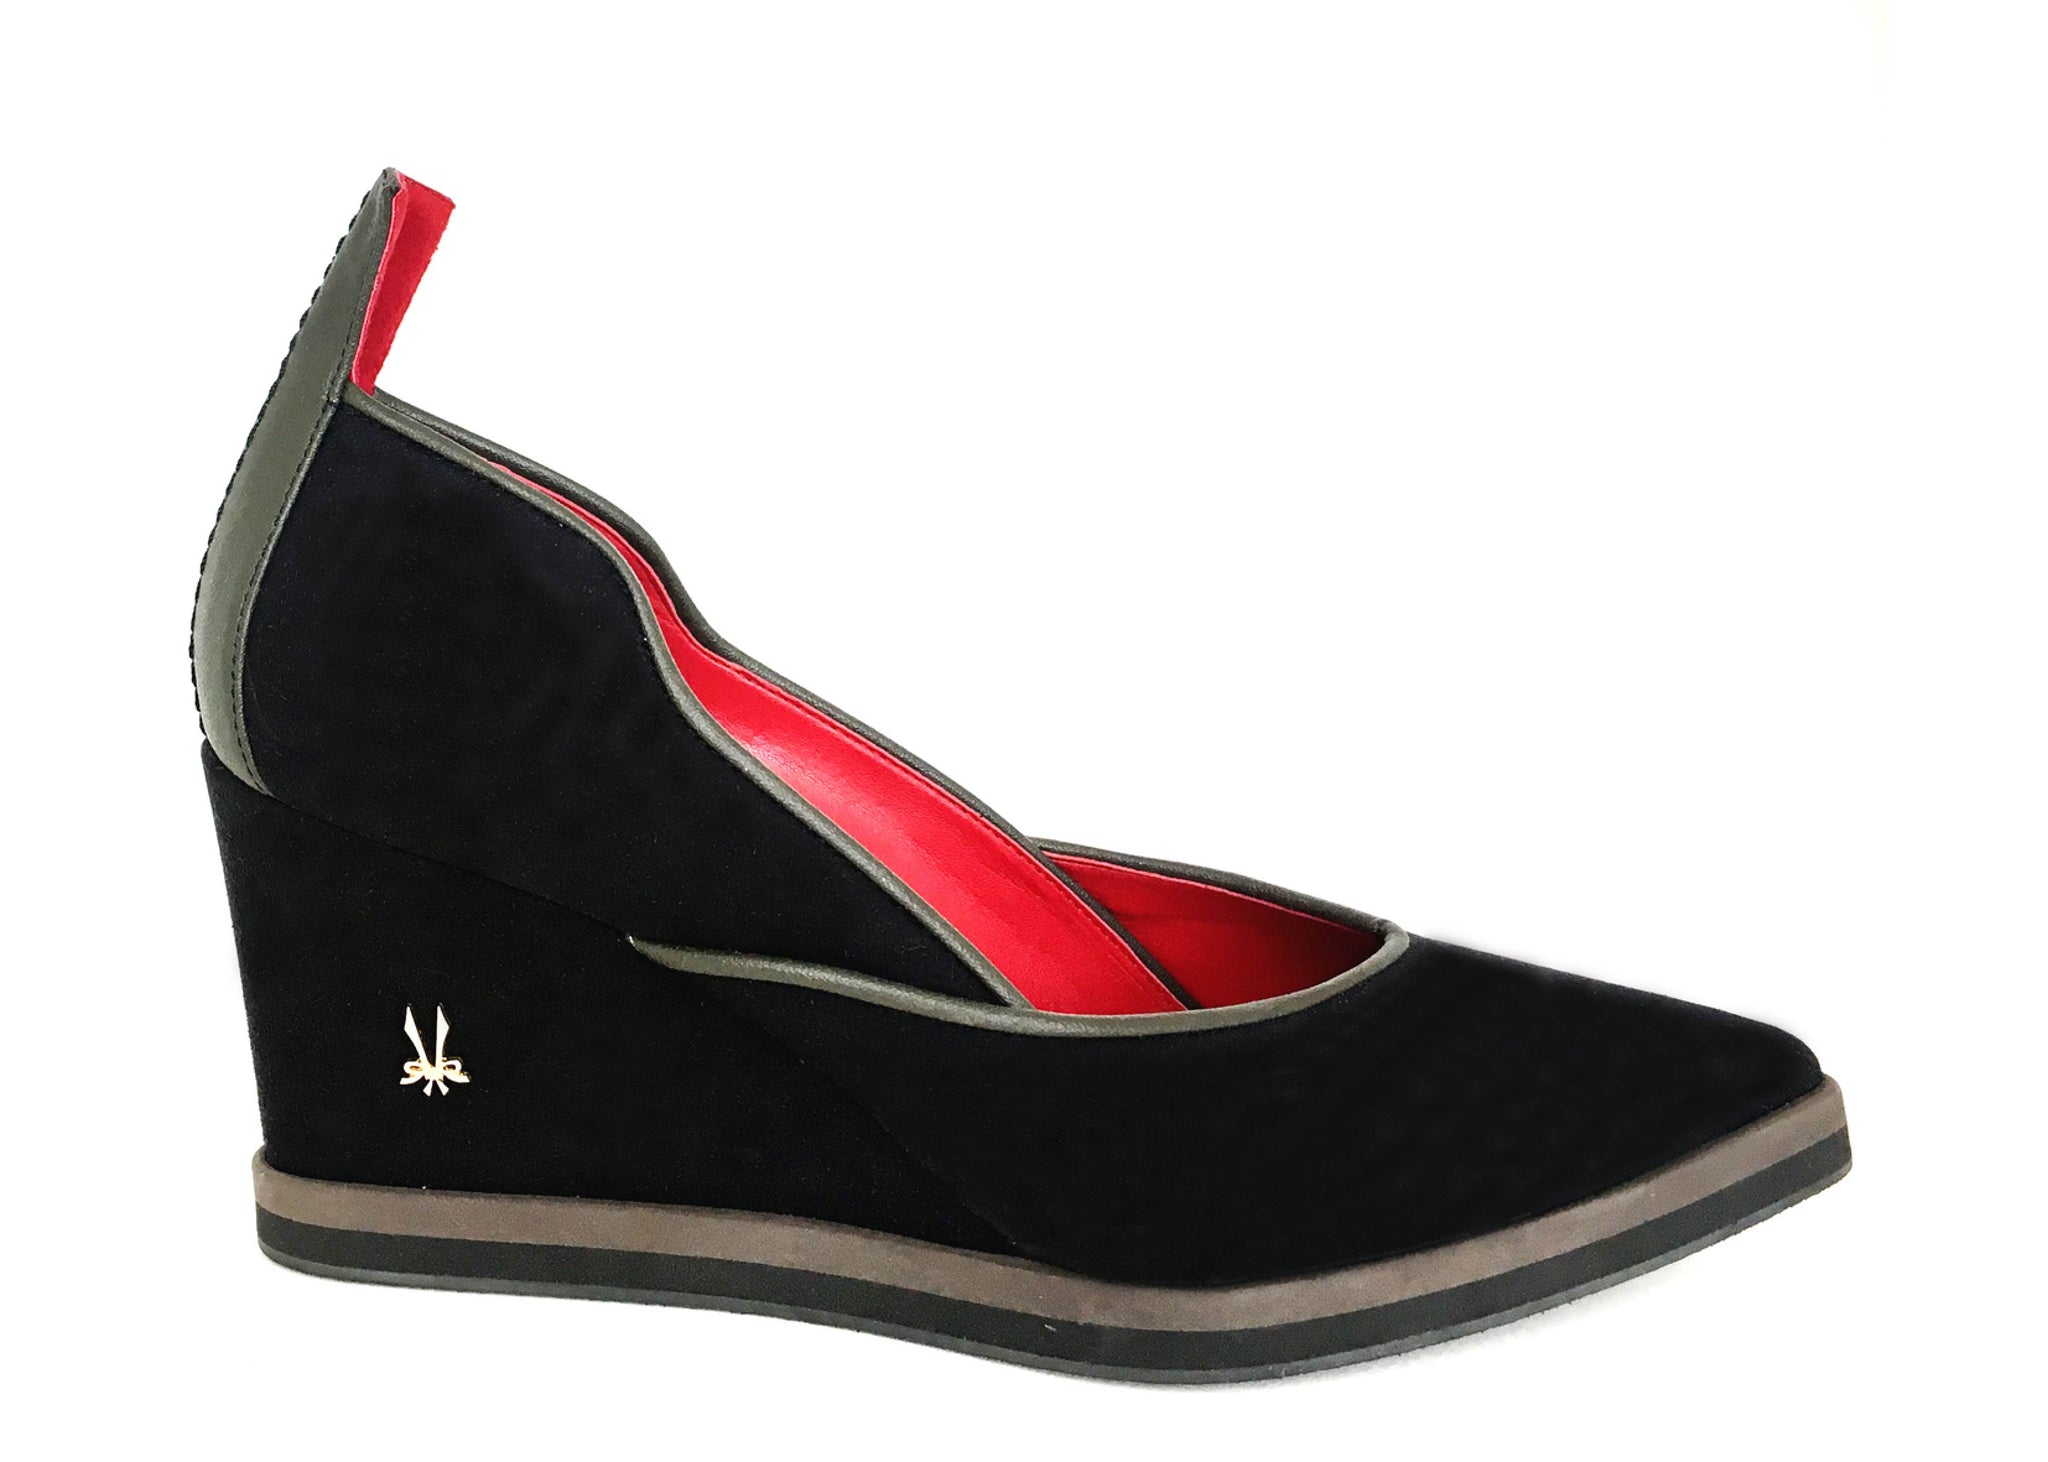 Black Wedge classic vegan shoes made in Italy by Ivana Basilotta for No Ones Skin  